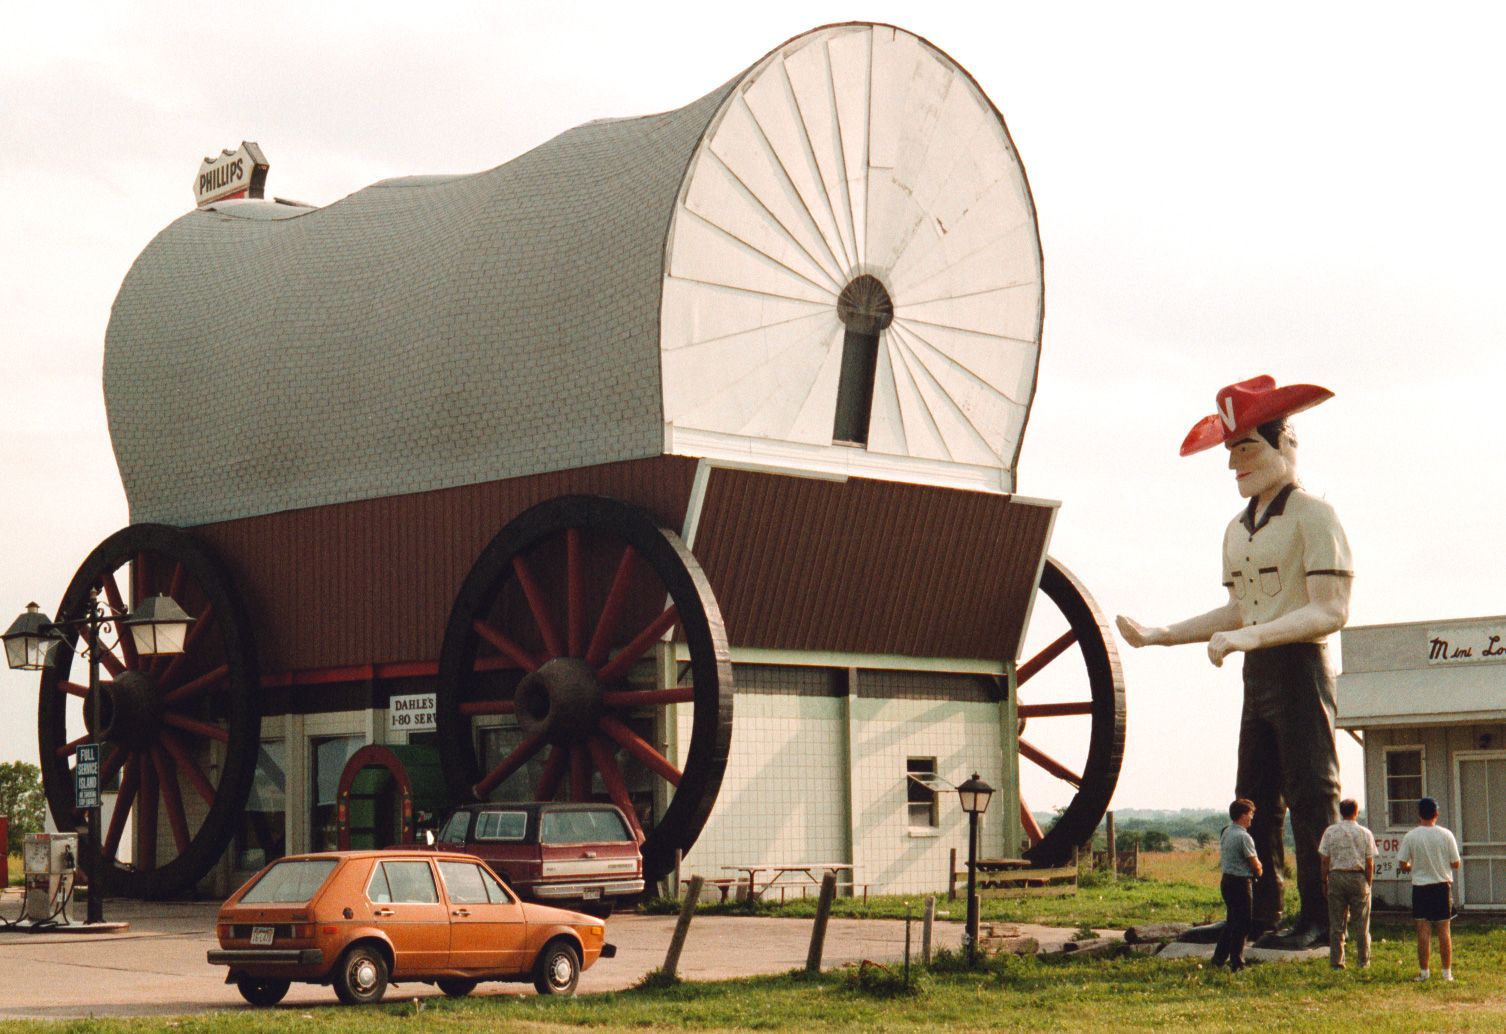 World’s Largest Covered Wagon, a world record in Milford, Nebraska